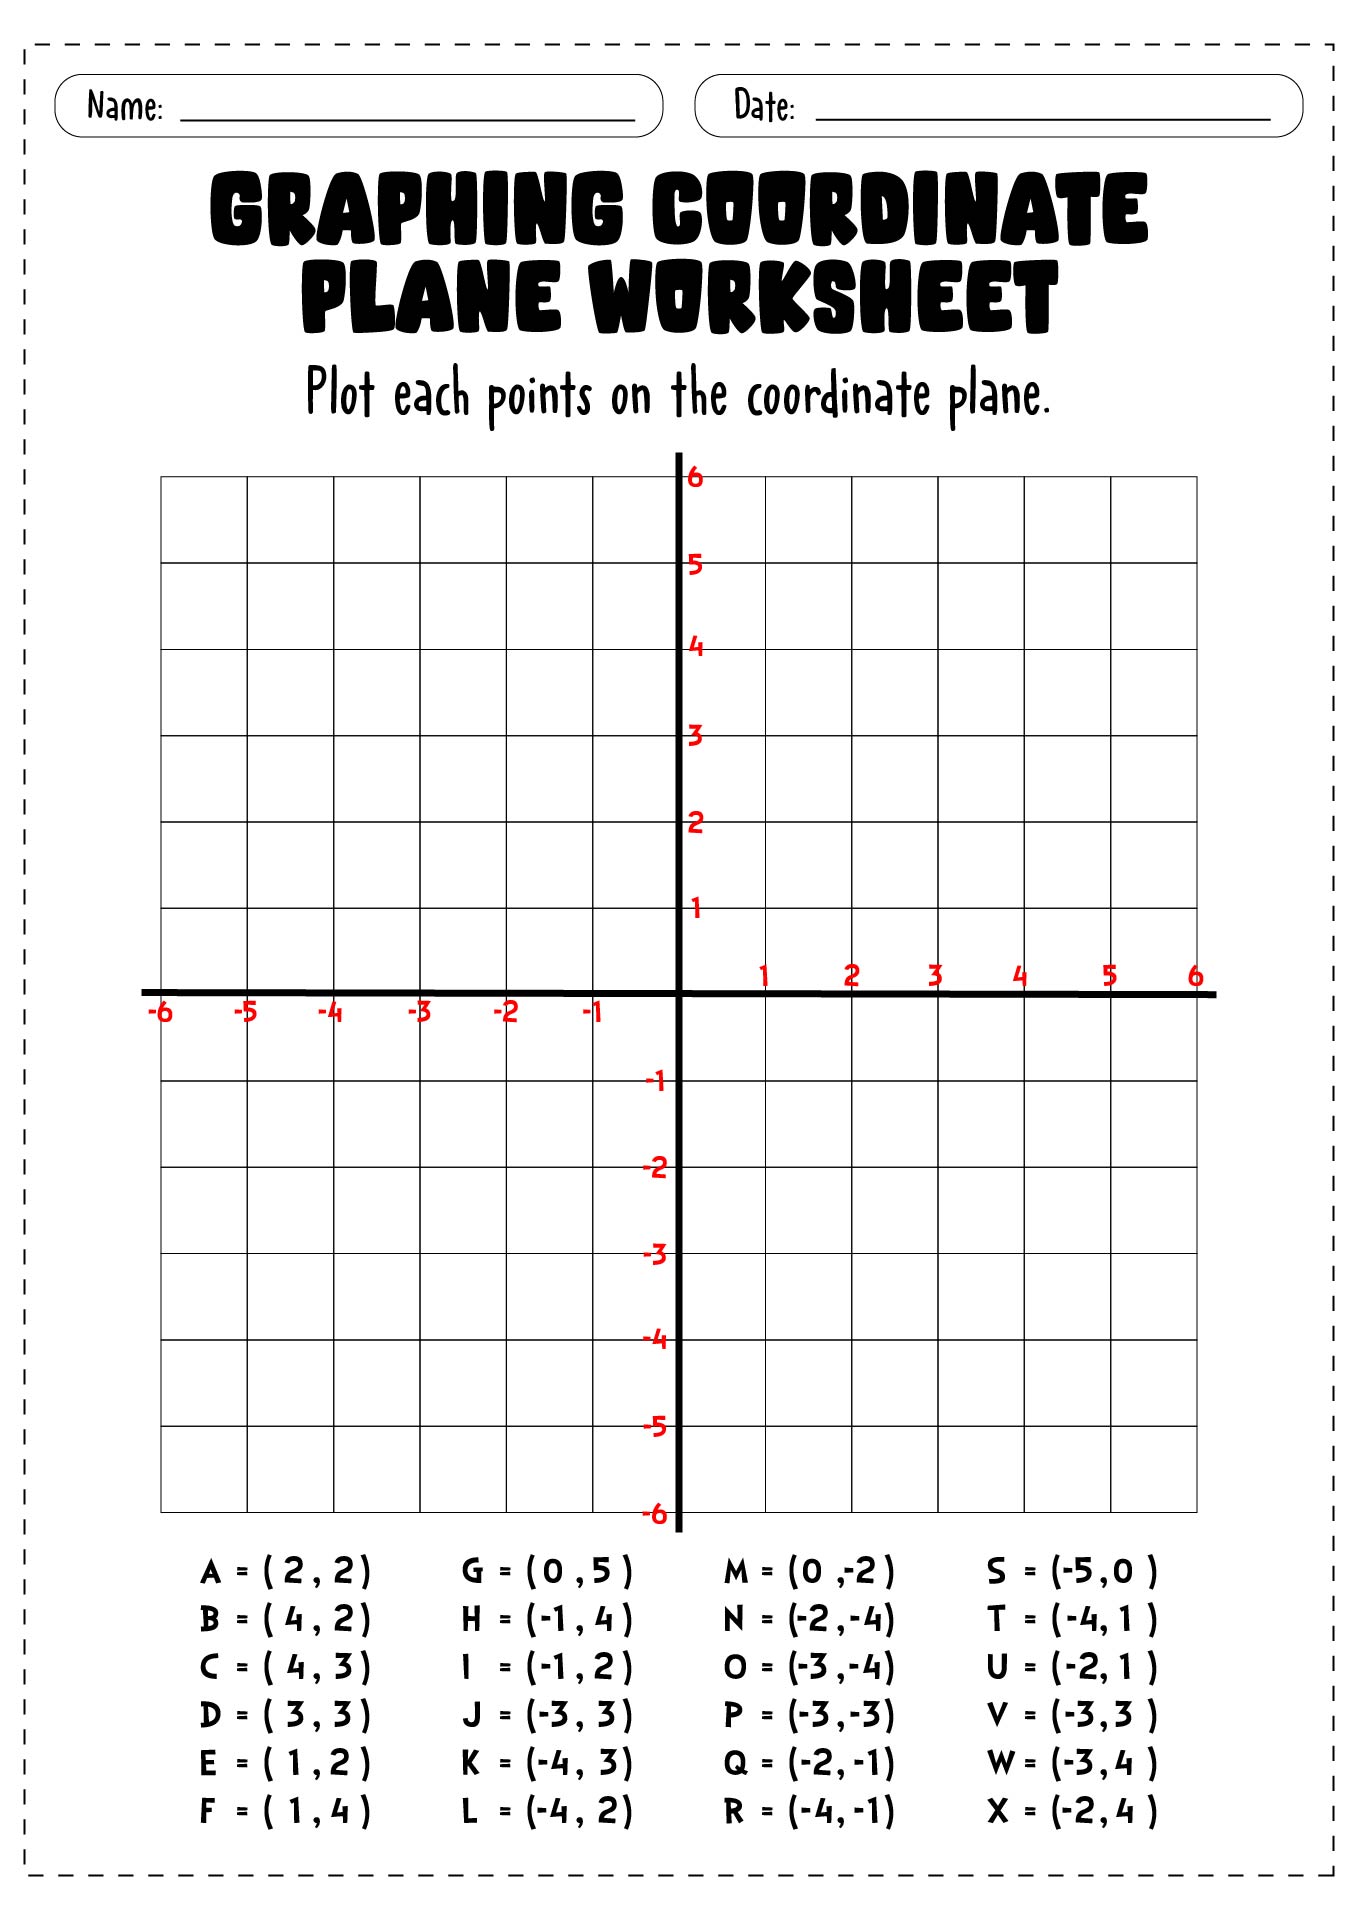 9 Connect The Dots Worksheets For Grade 1 - Free PDF at worksheeto.com